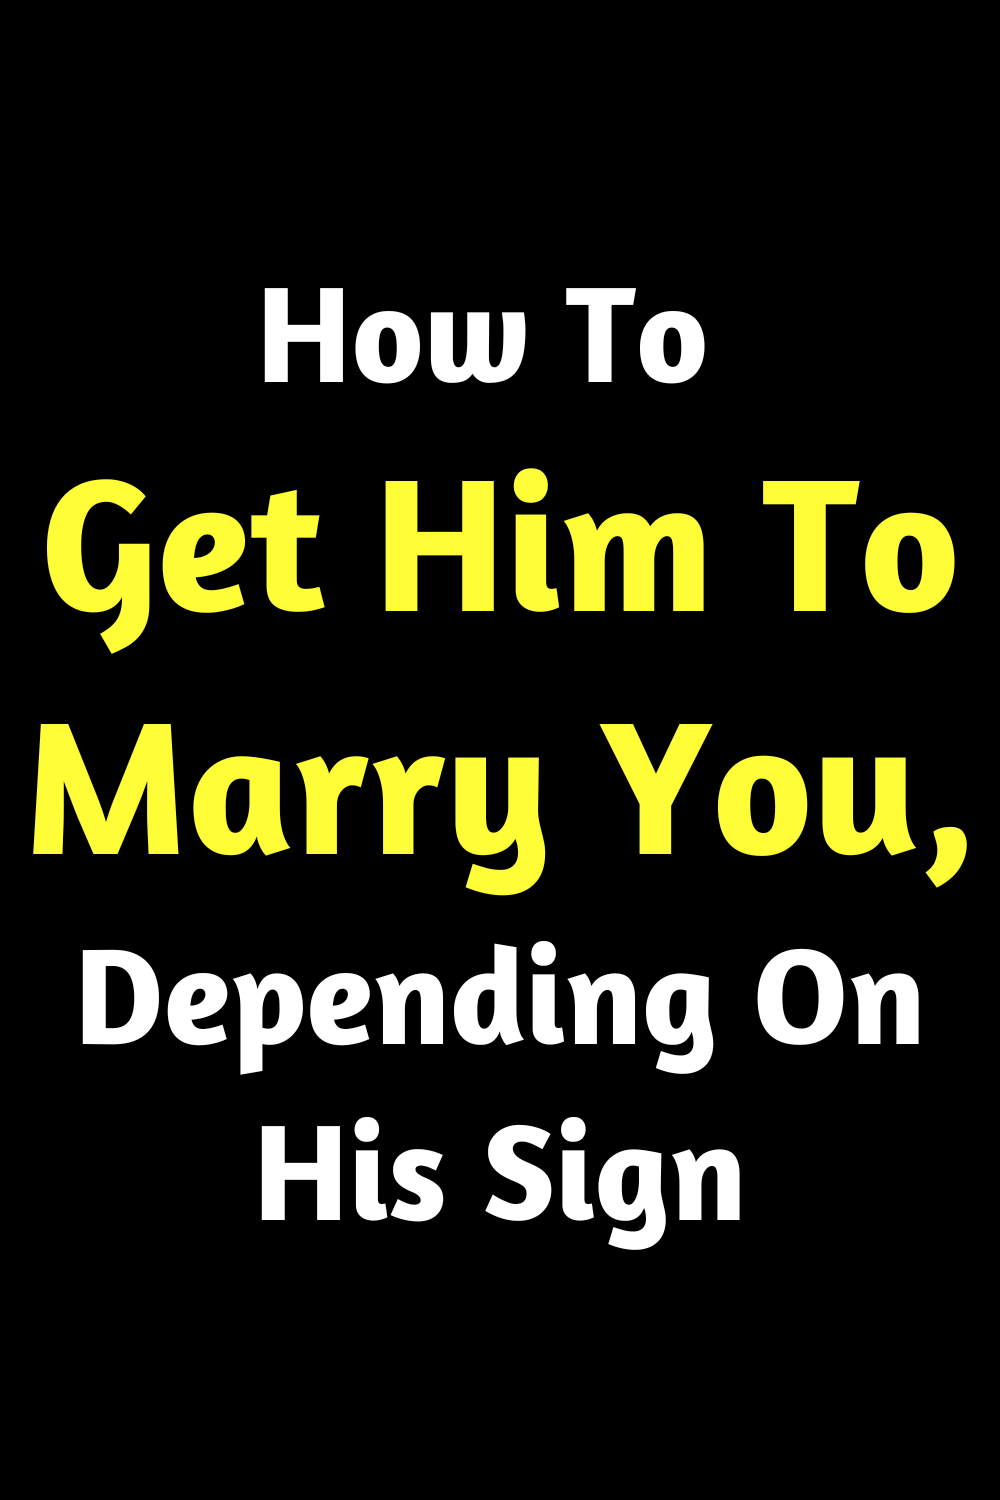 How To Get Him To Marry You, Depending On His Sign